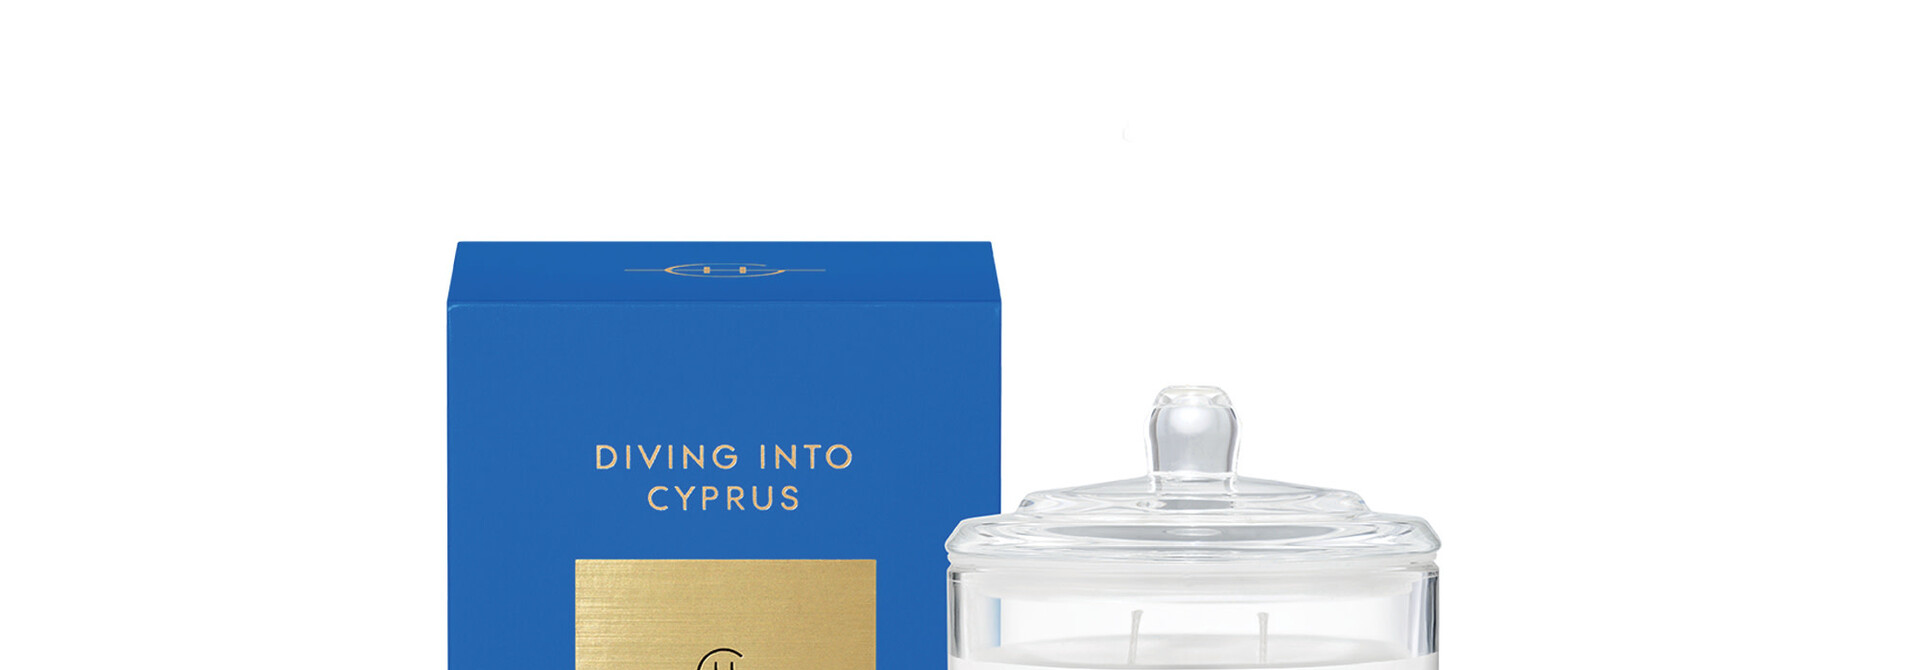 Diving into Cyprus | The Home Fragrance Collection, Candle - 13.4 Oz